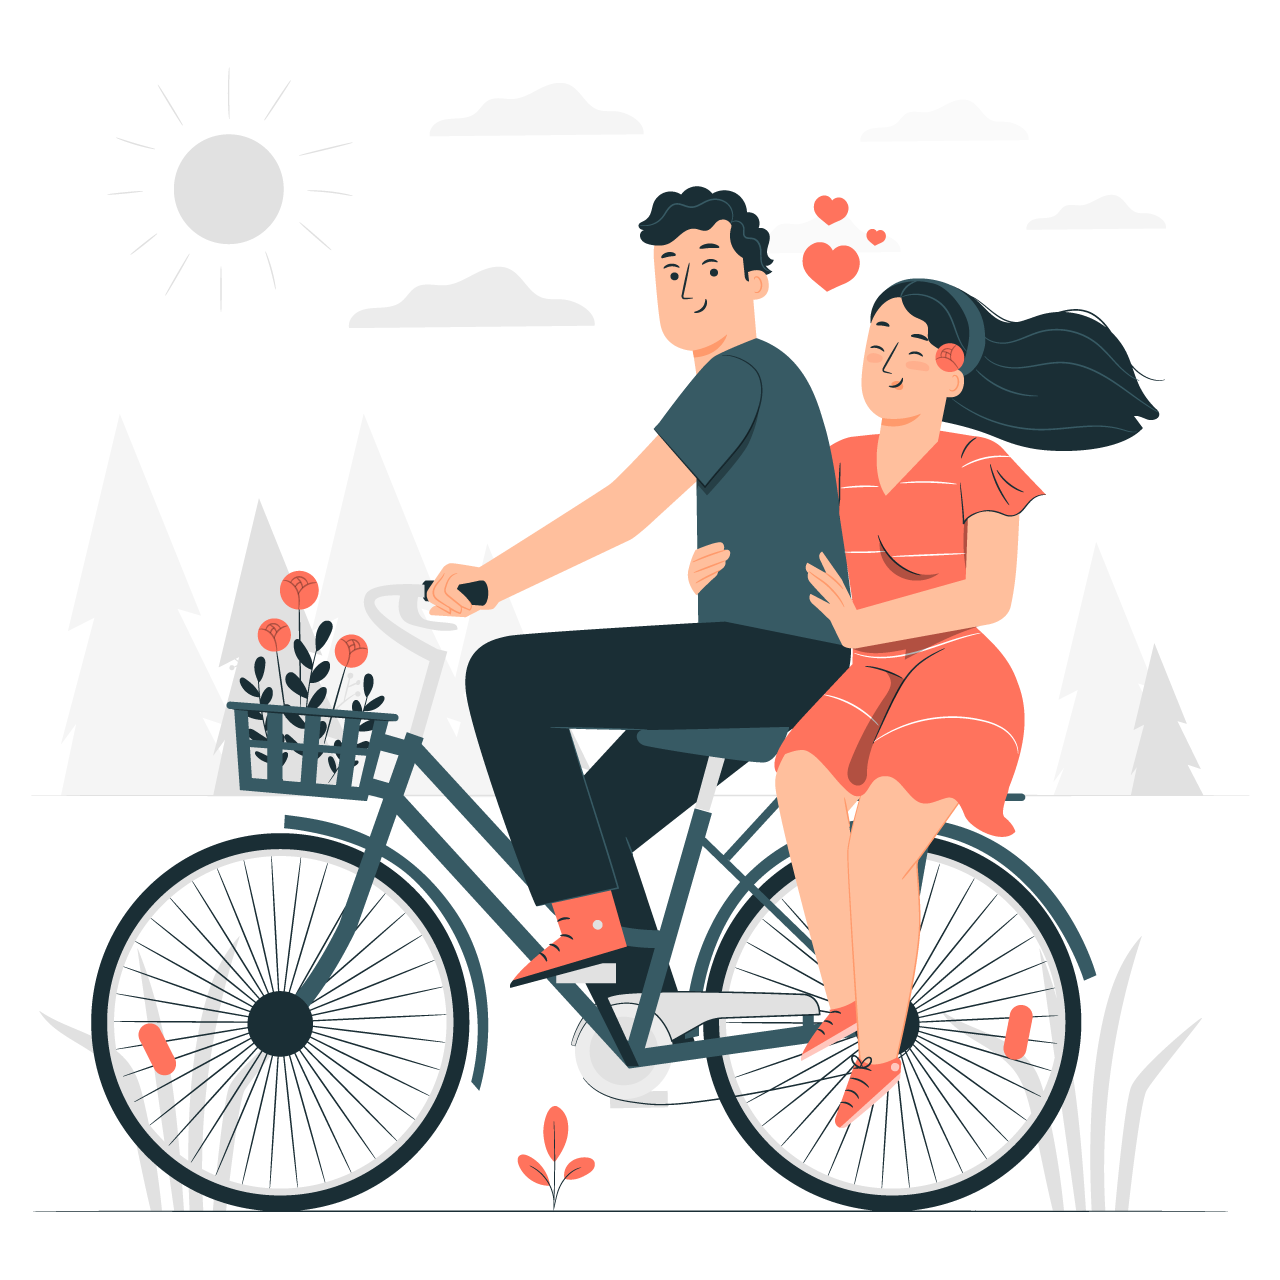 Red heart clipart couple bicycle concept cartoon illustration image